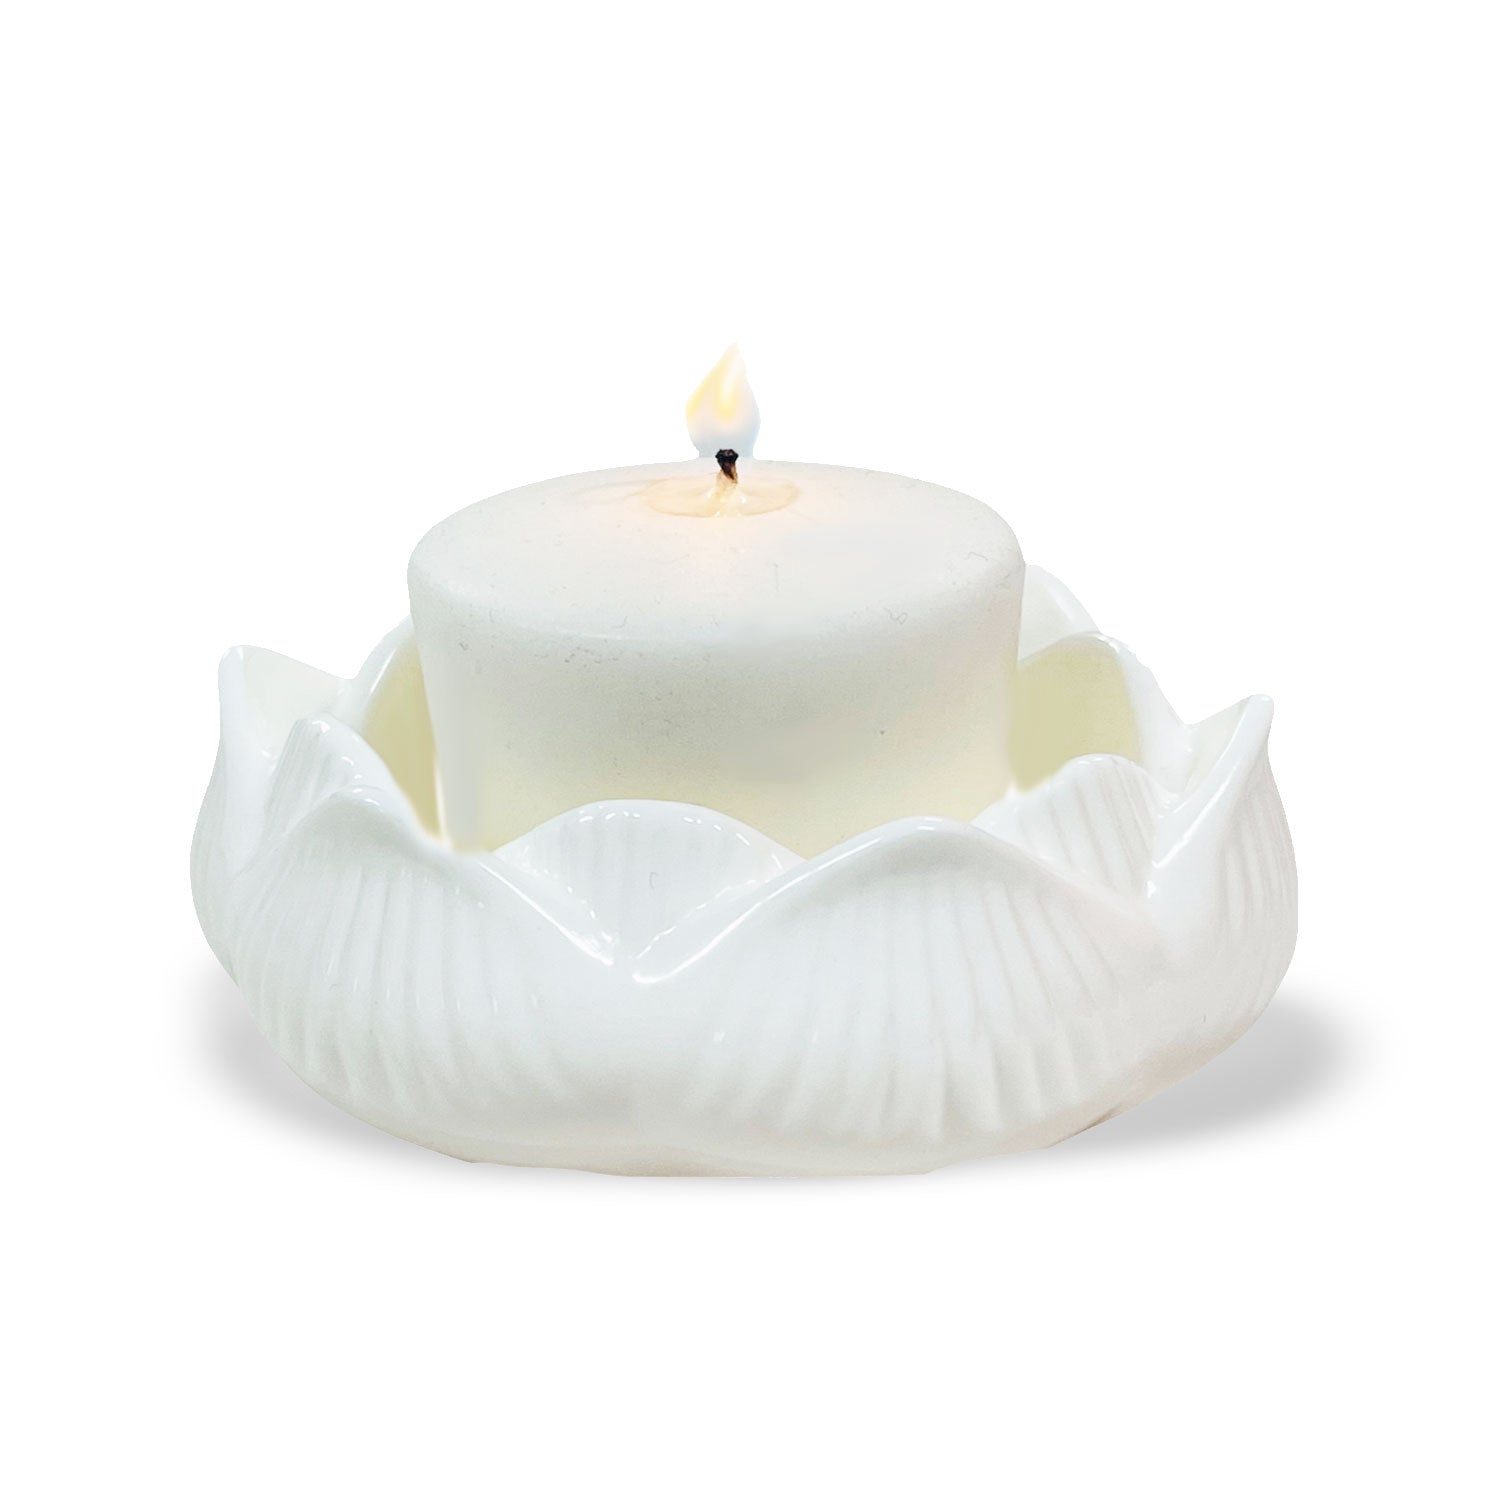 Memorial Flower Petals Votive Holder With Wax Candle - Celebrate Prints